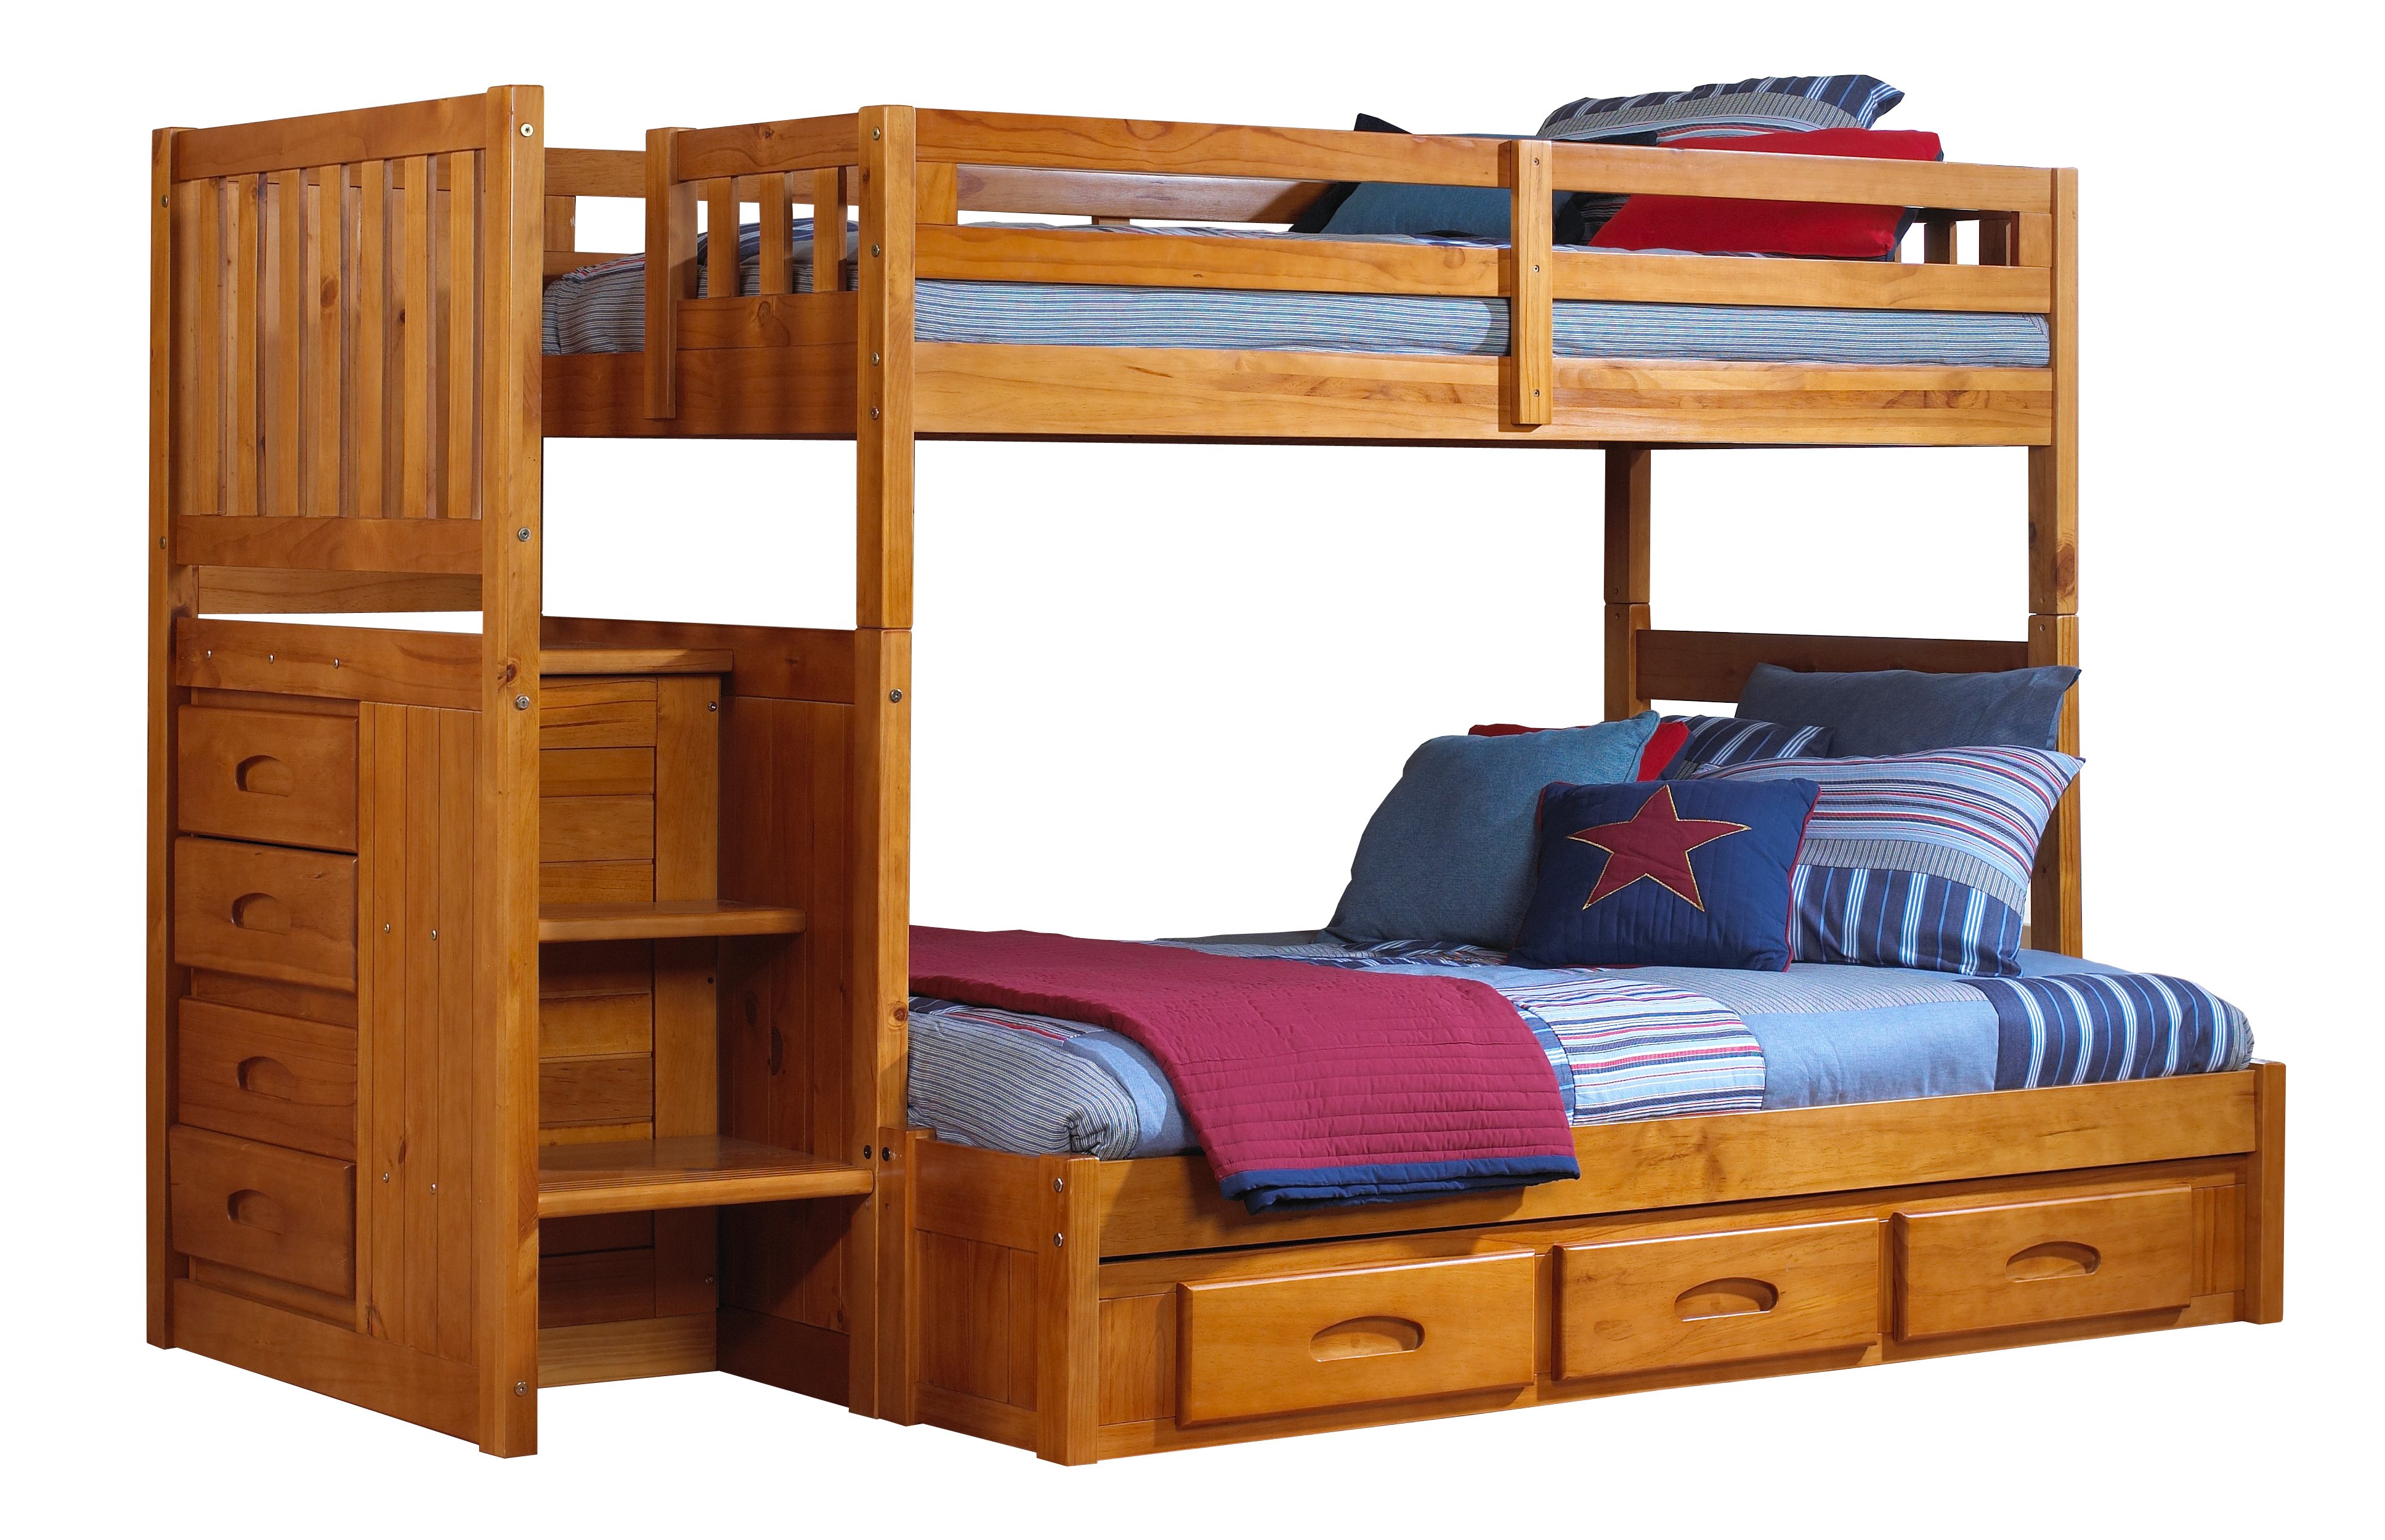 Honey Staircase Bunk Bed, Discovery World Furniture Bunk Bed Reviews